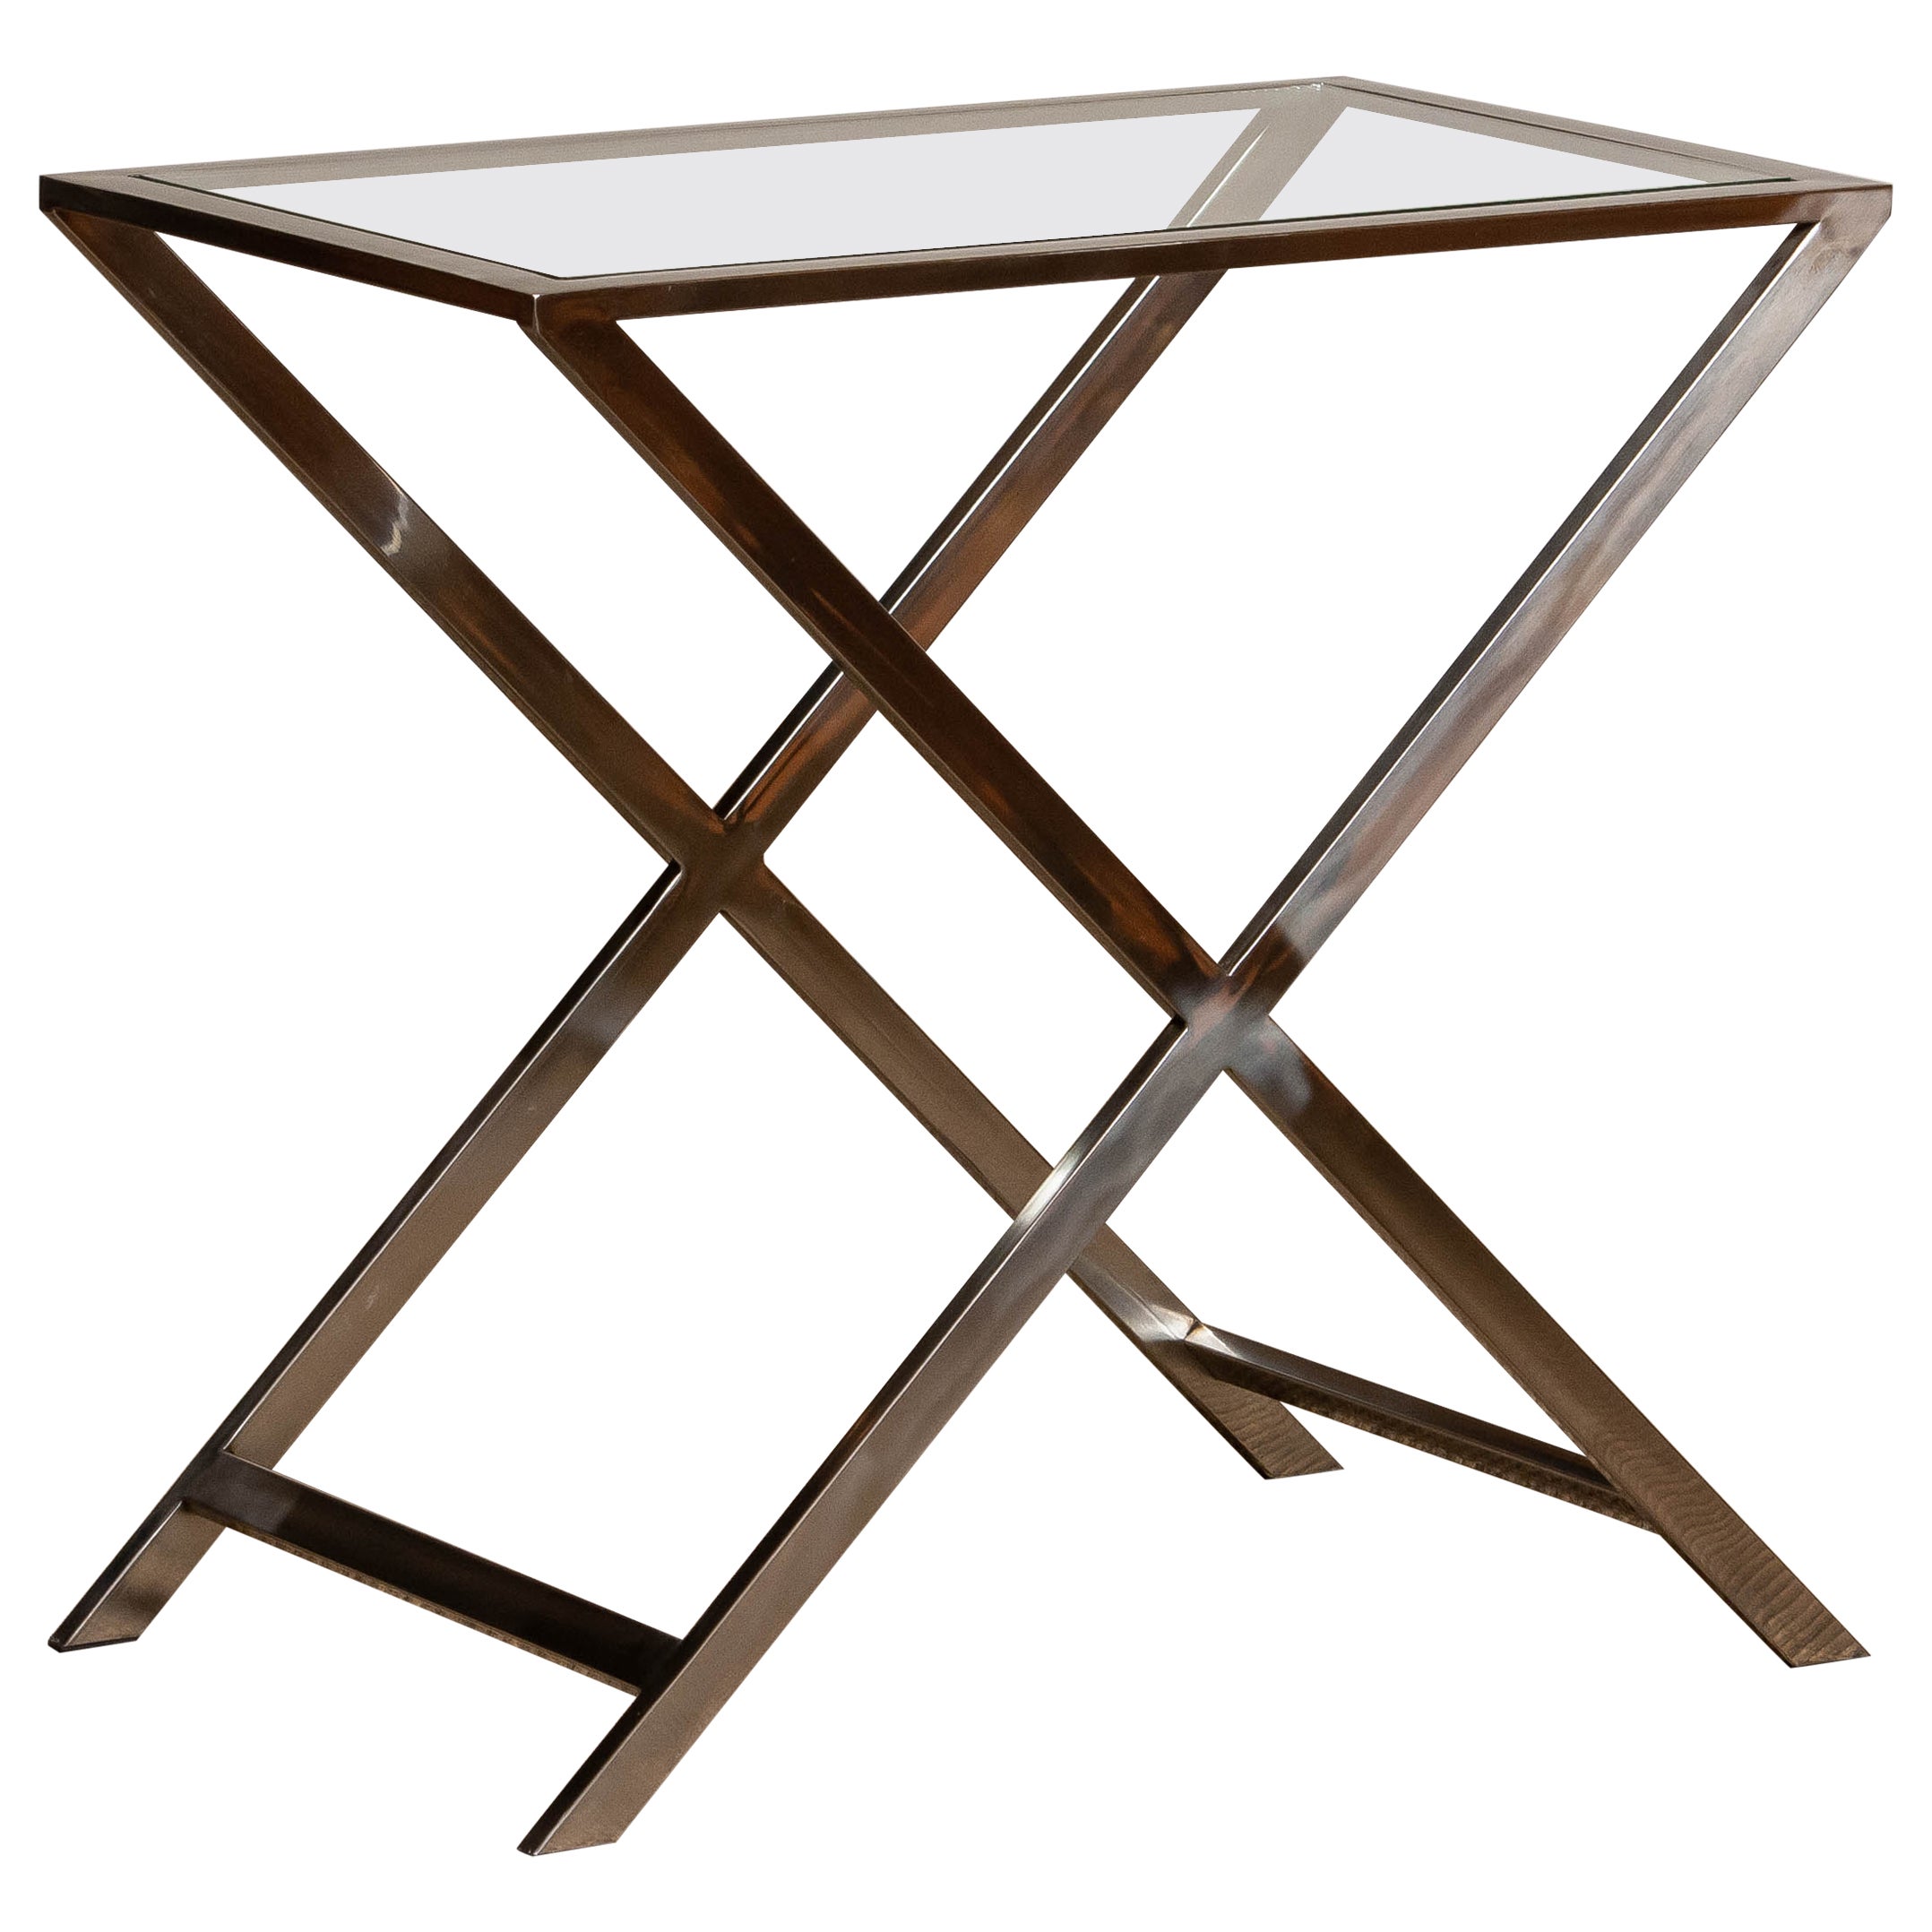 1970's Chrome X / Cross Legs Site Table with Glass Top in Milo Baughman Style For Sale